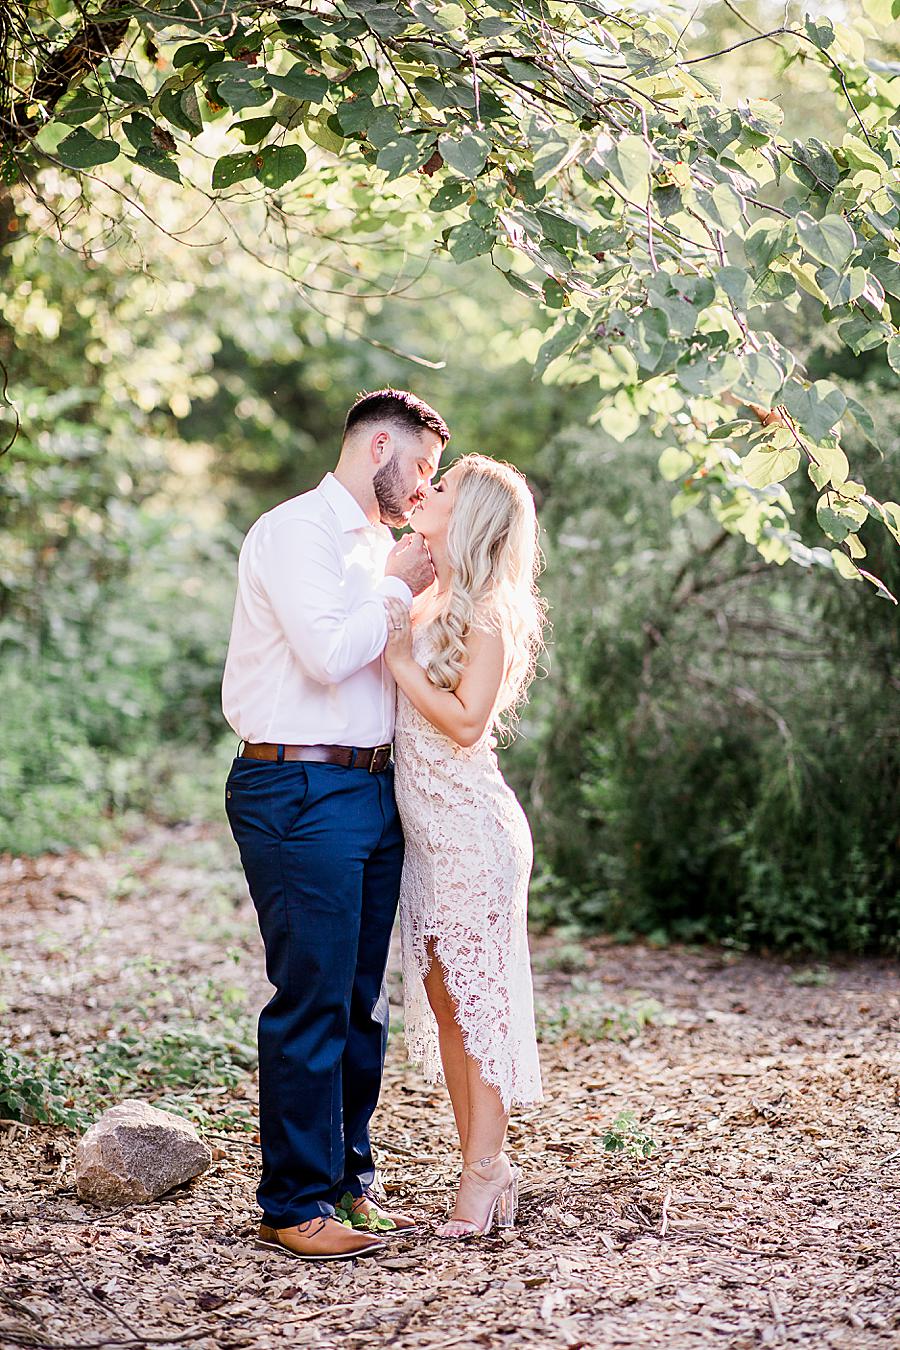 Kisses at this Meads Quarry engagement by Knoxville Wedding Photographer, Amanda May Photos.